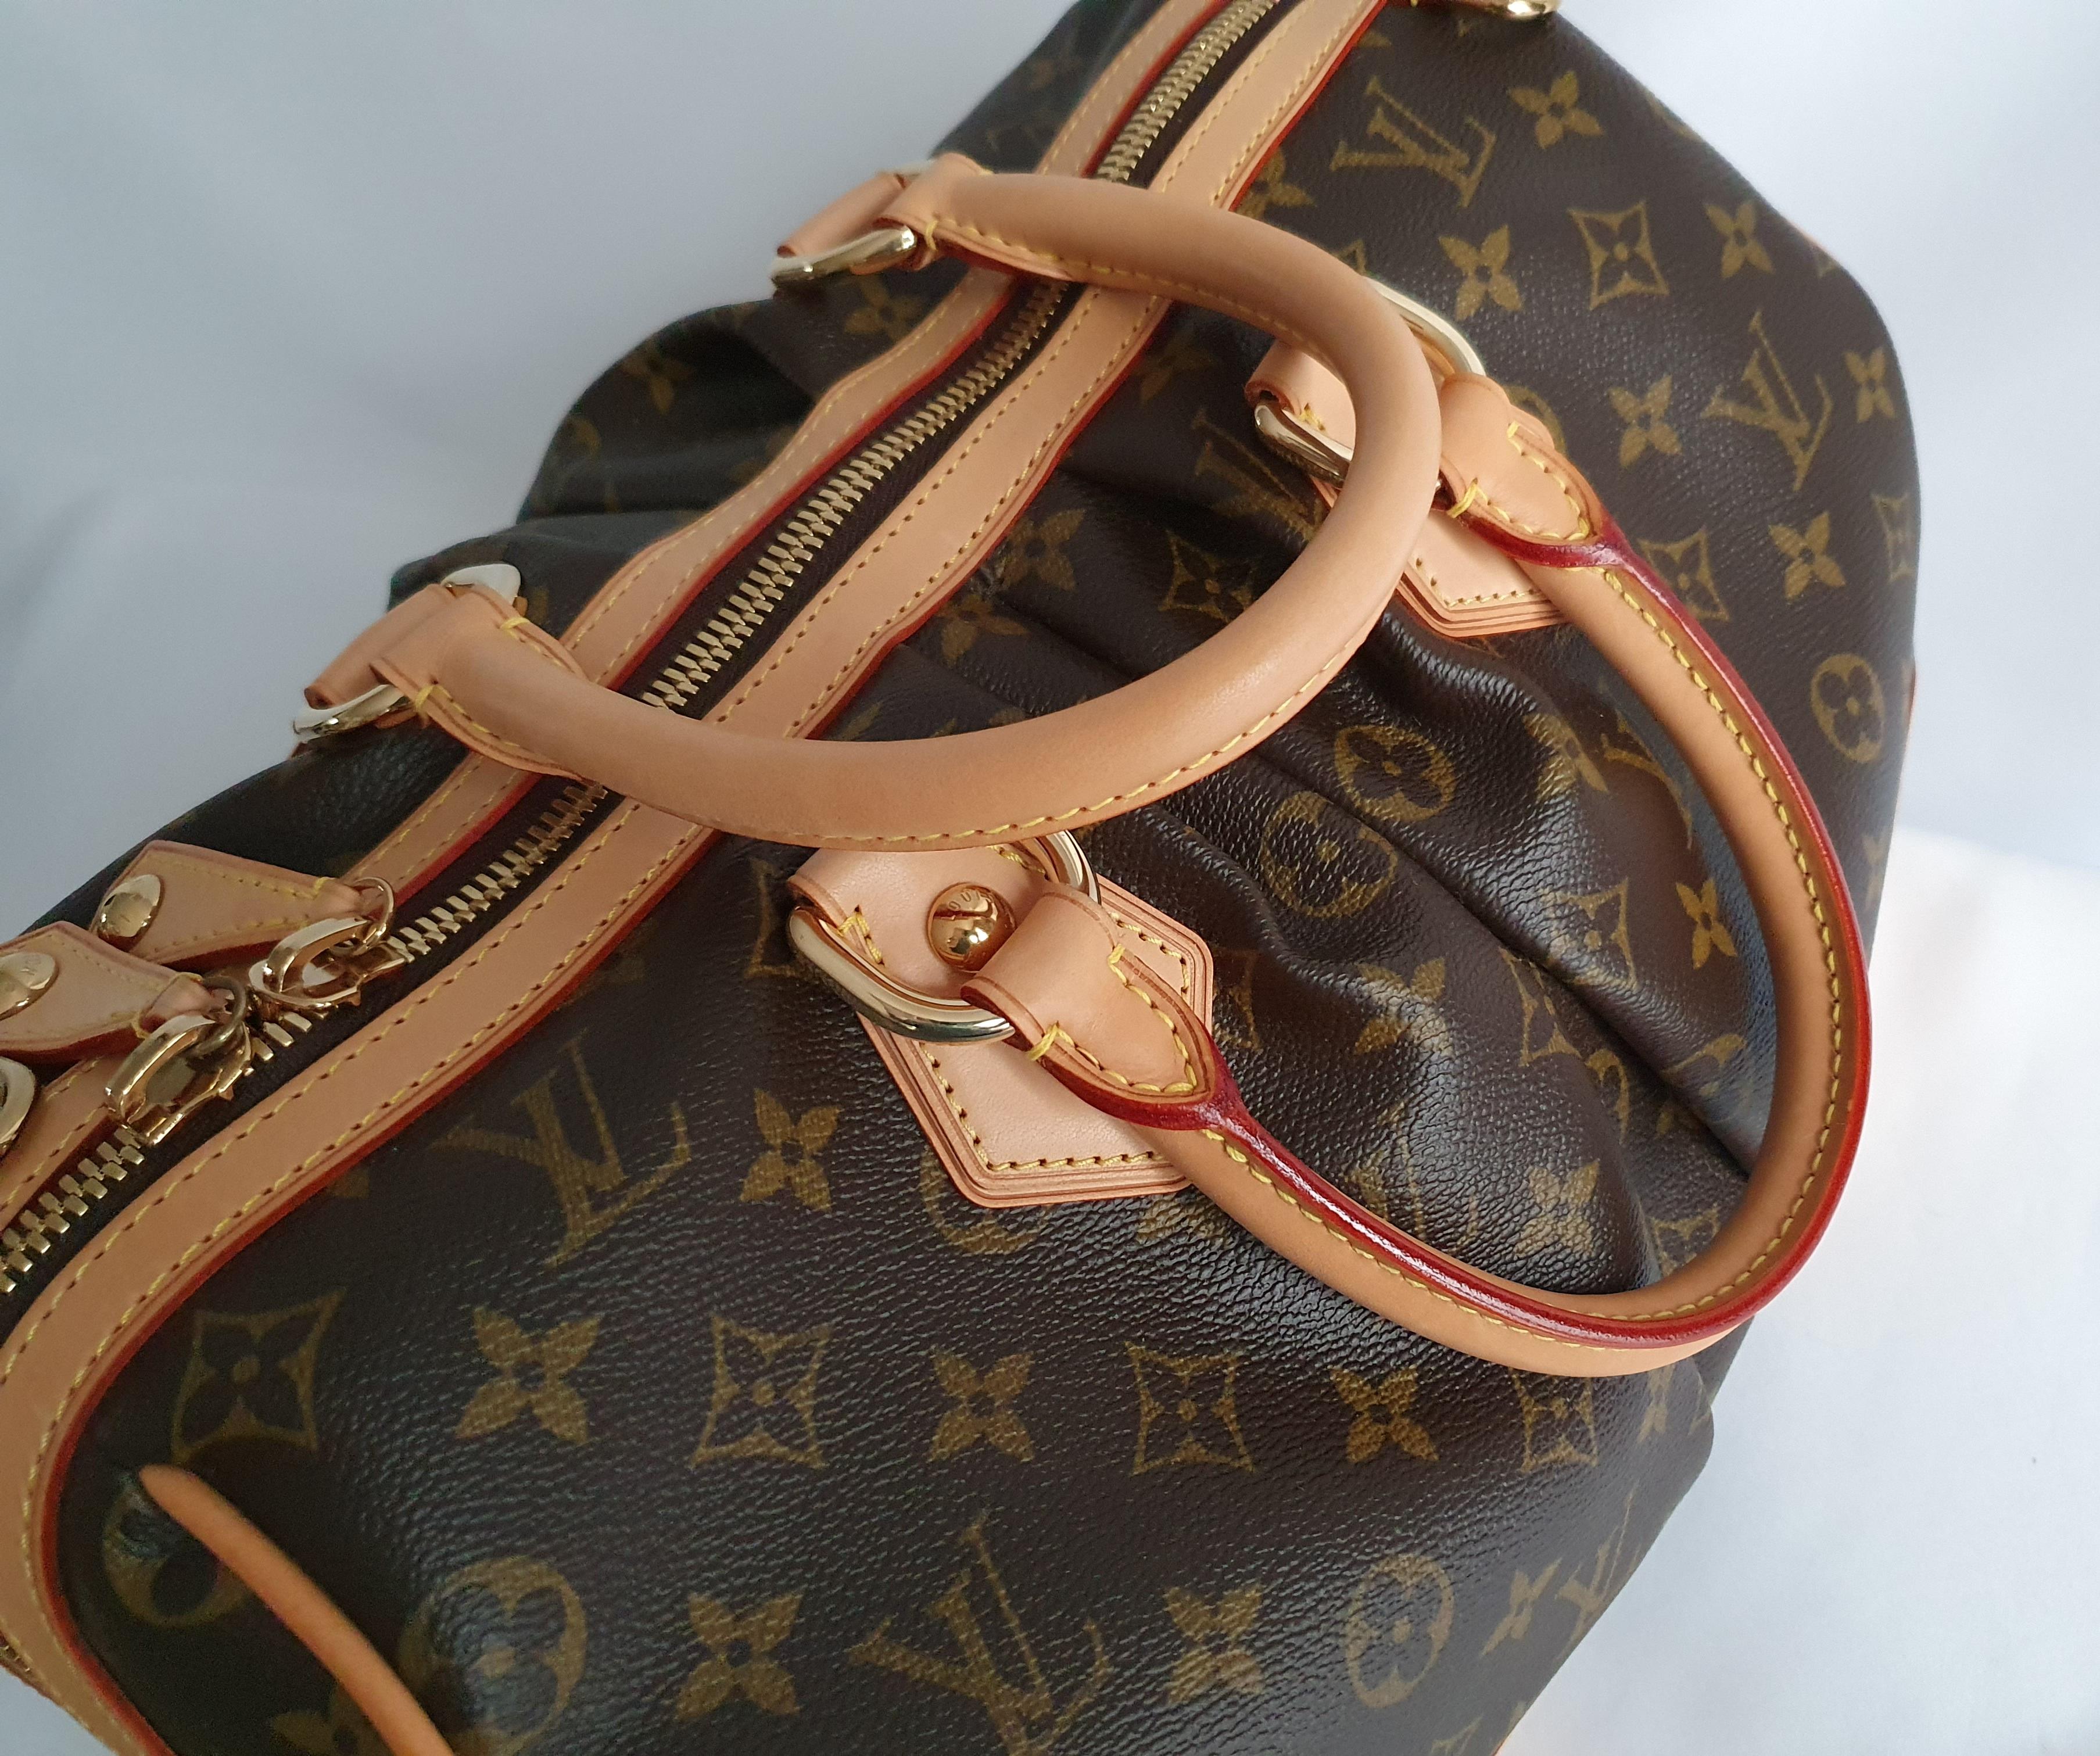 - Designer: LOUIS VUITTON
- Model: Stephen Monogram
- Condition: Very good condition. Sign of wear on Leather
- Accessories: Dustbag
- Measurements: Width: 34cm , Height: 23cm, Depth: 22cm 
- Exterior Material: Canvas
- Exterior Color: Brown
-